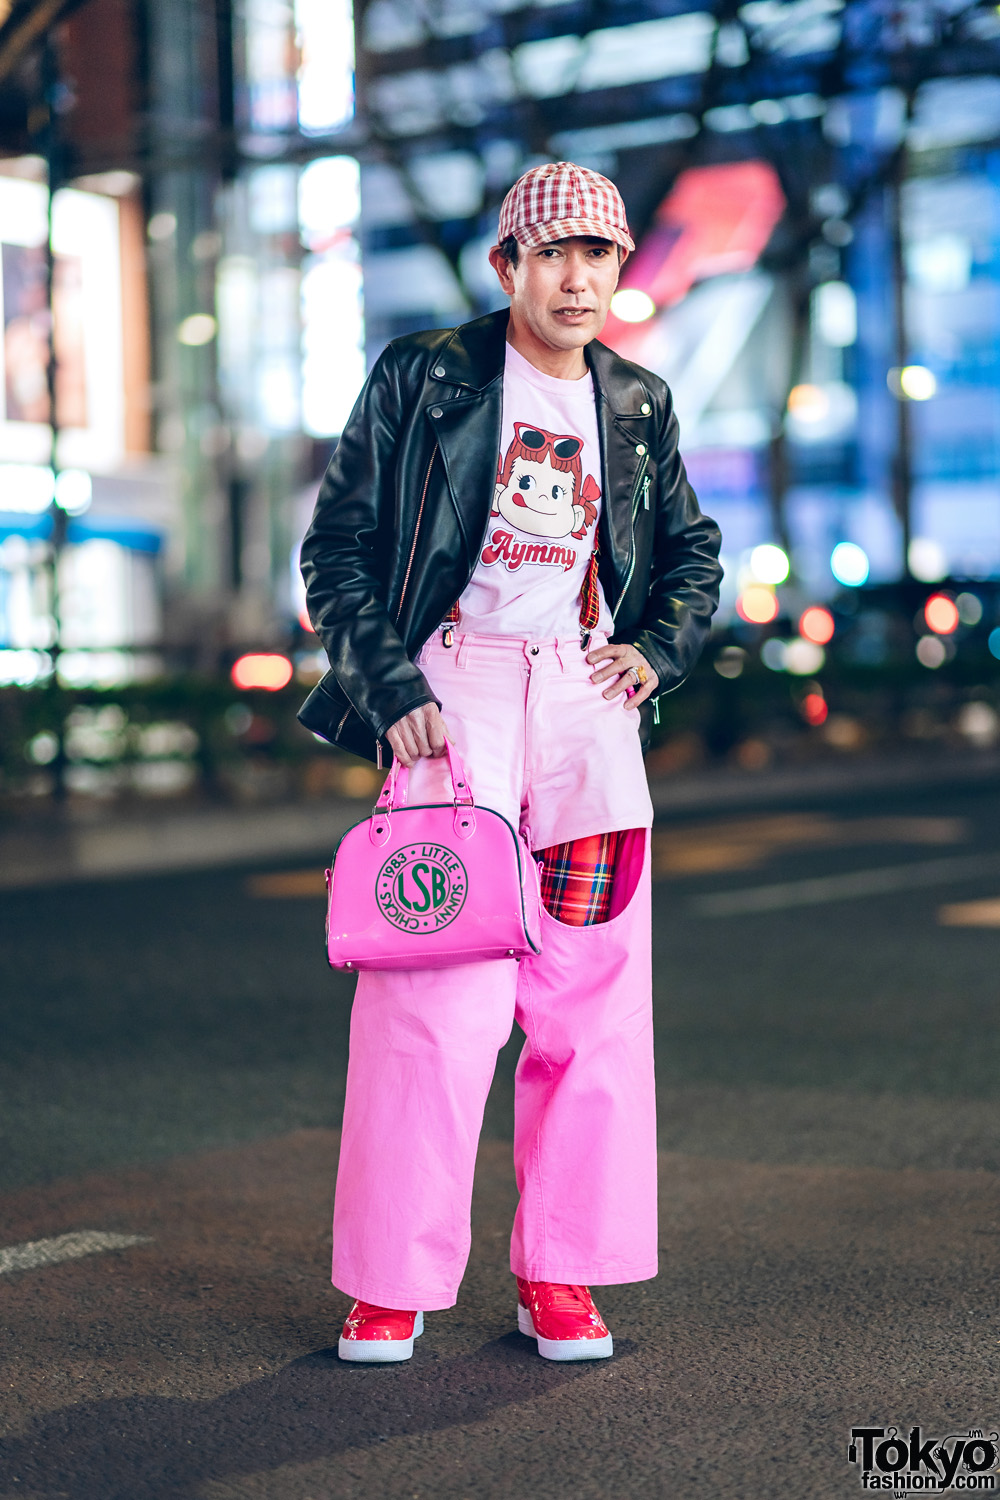 Harajuku Street Style w/ Calvin Klein Leather Jacket, Aymmy in the Batty Girls, Plaid Suspenders, X-Girl, Pinnap, Little Sunny Bite & Nike Sneakers